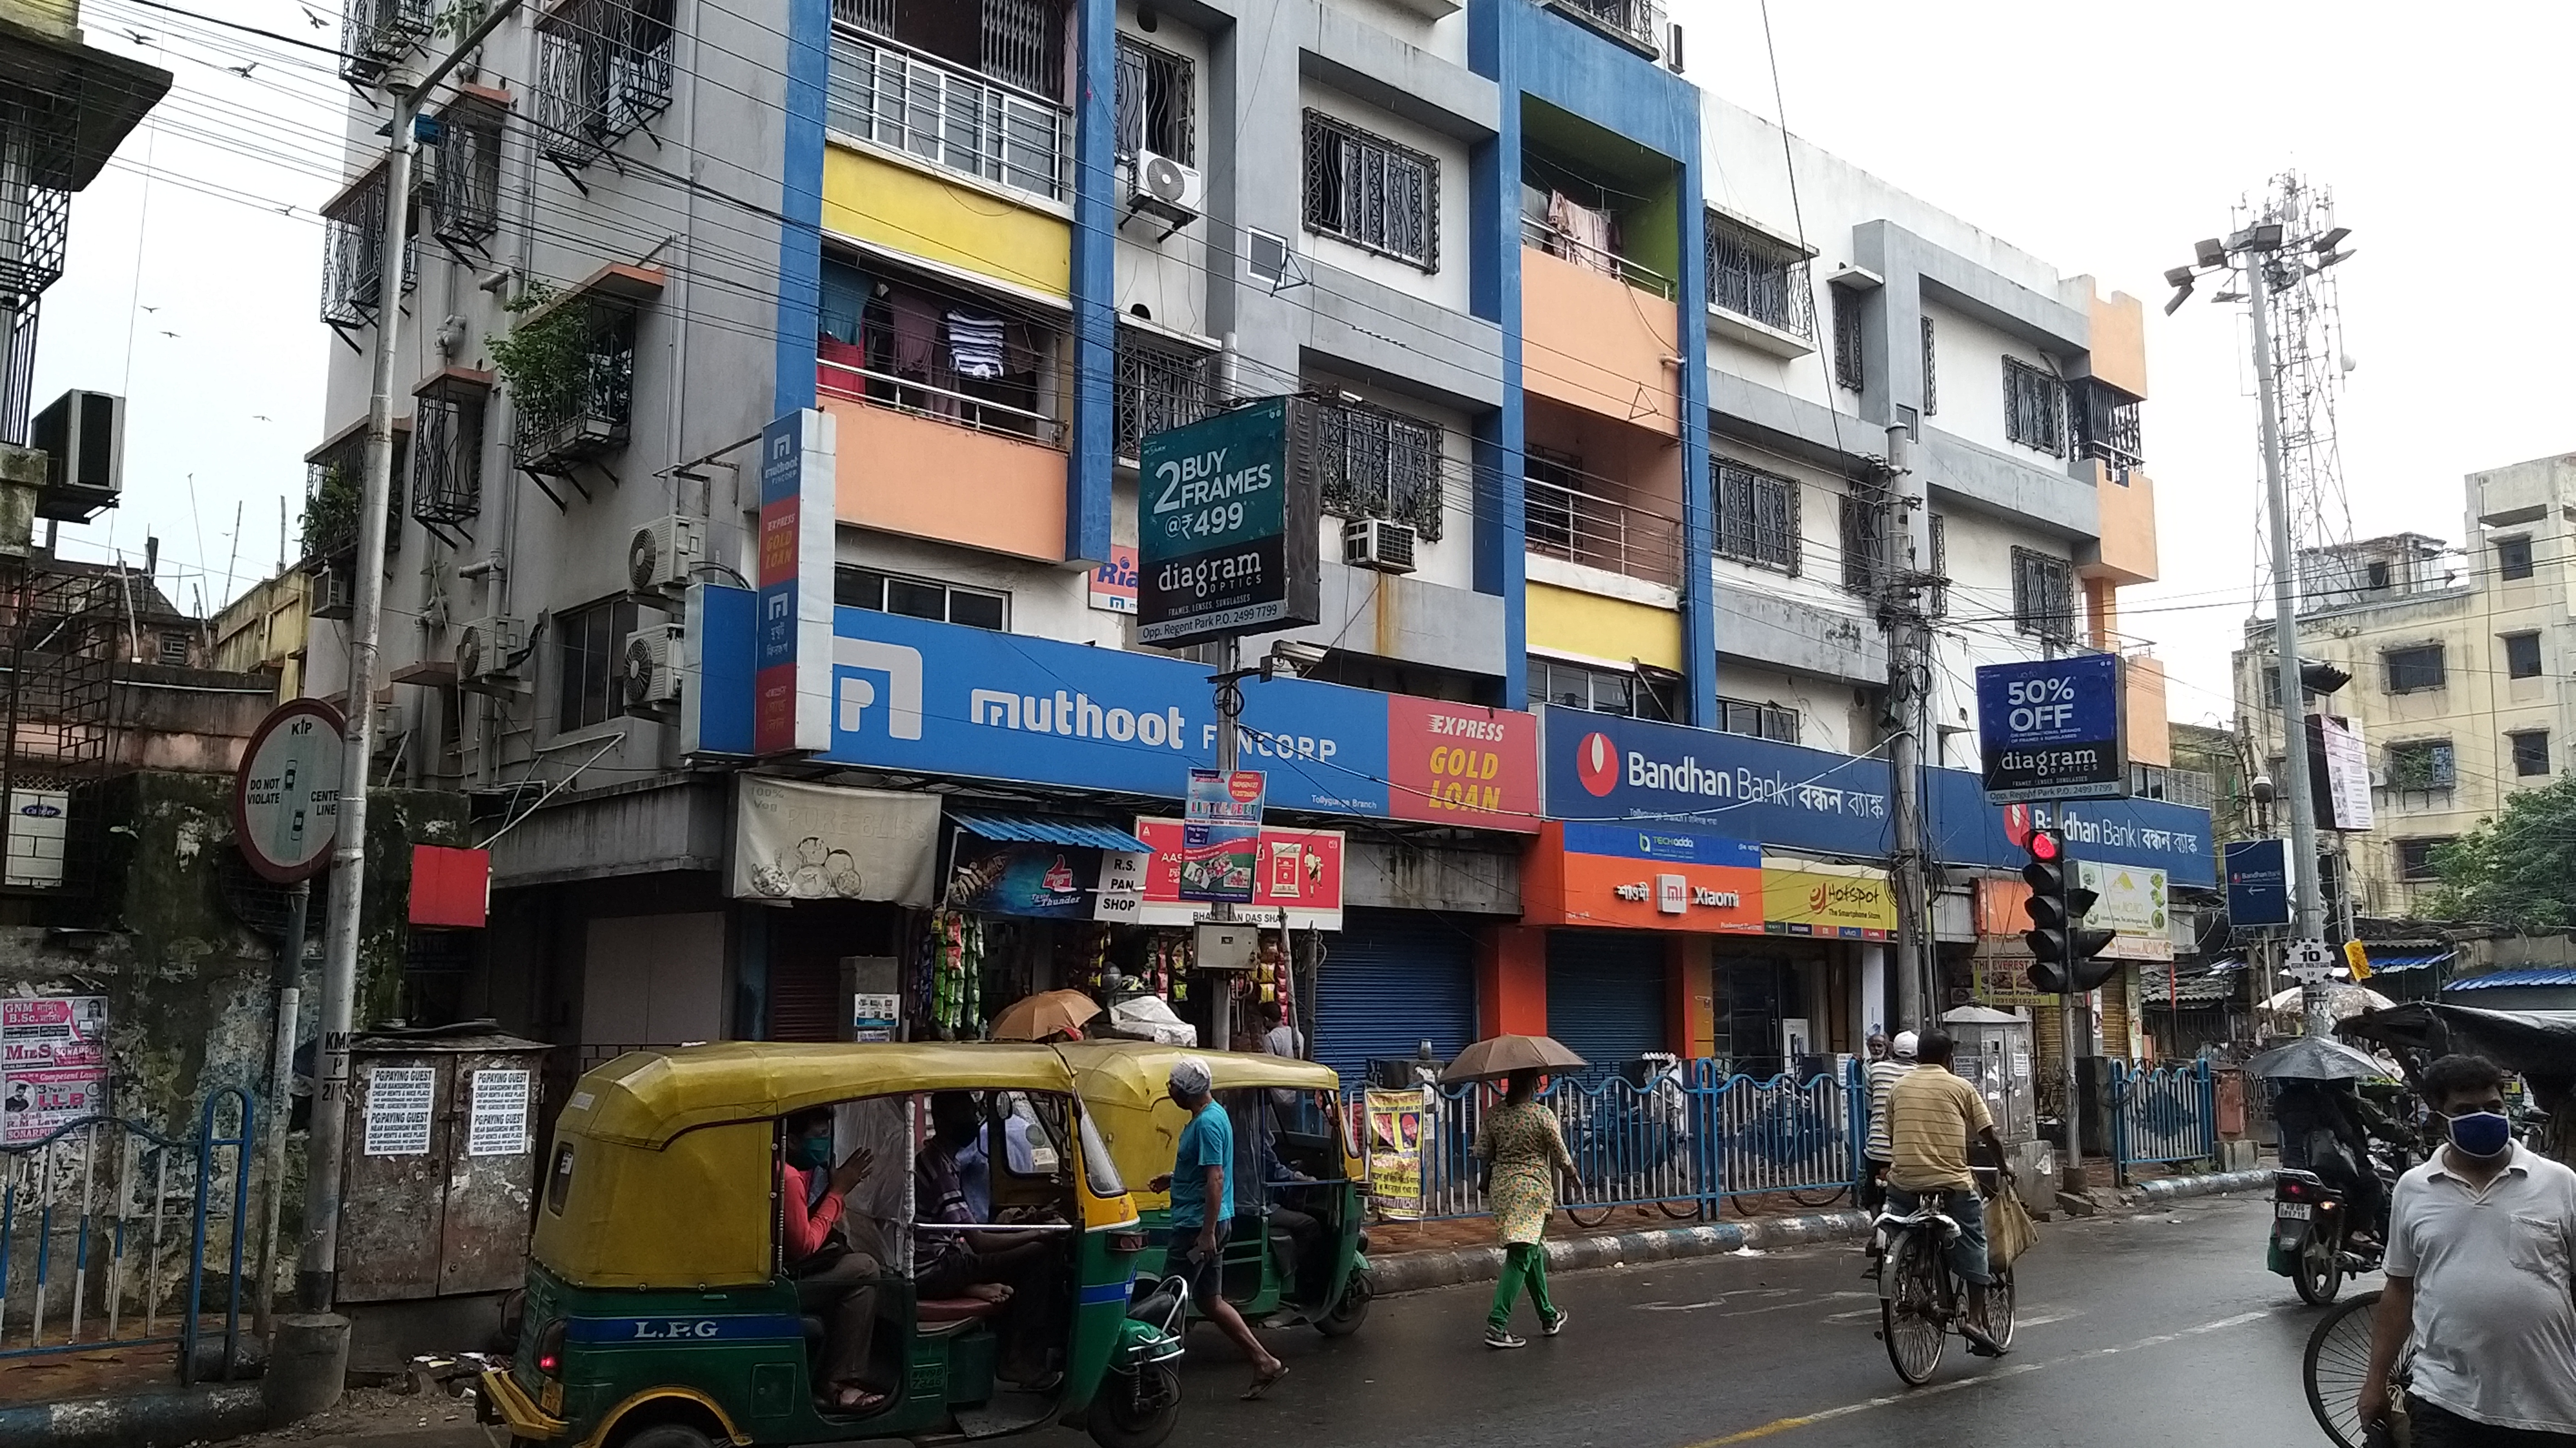 Muthoot Fincorp Gold Loan Services in Tollygunge, Kolkata, West Bengal